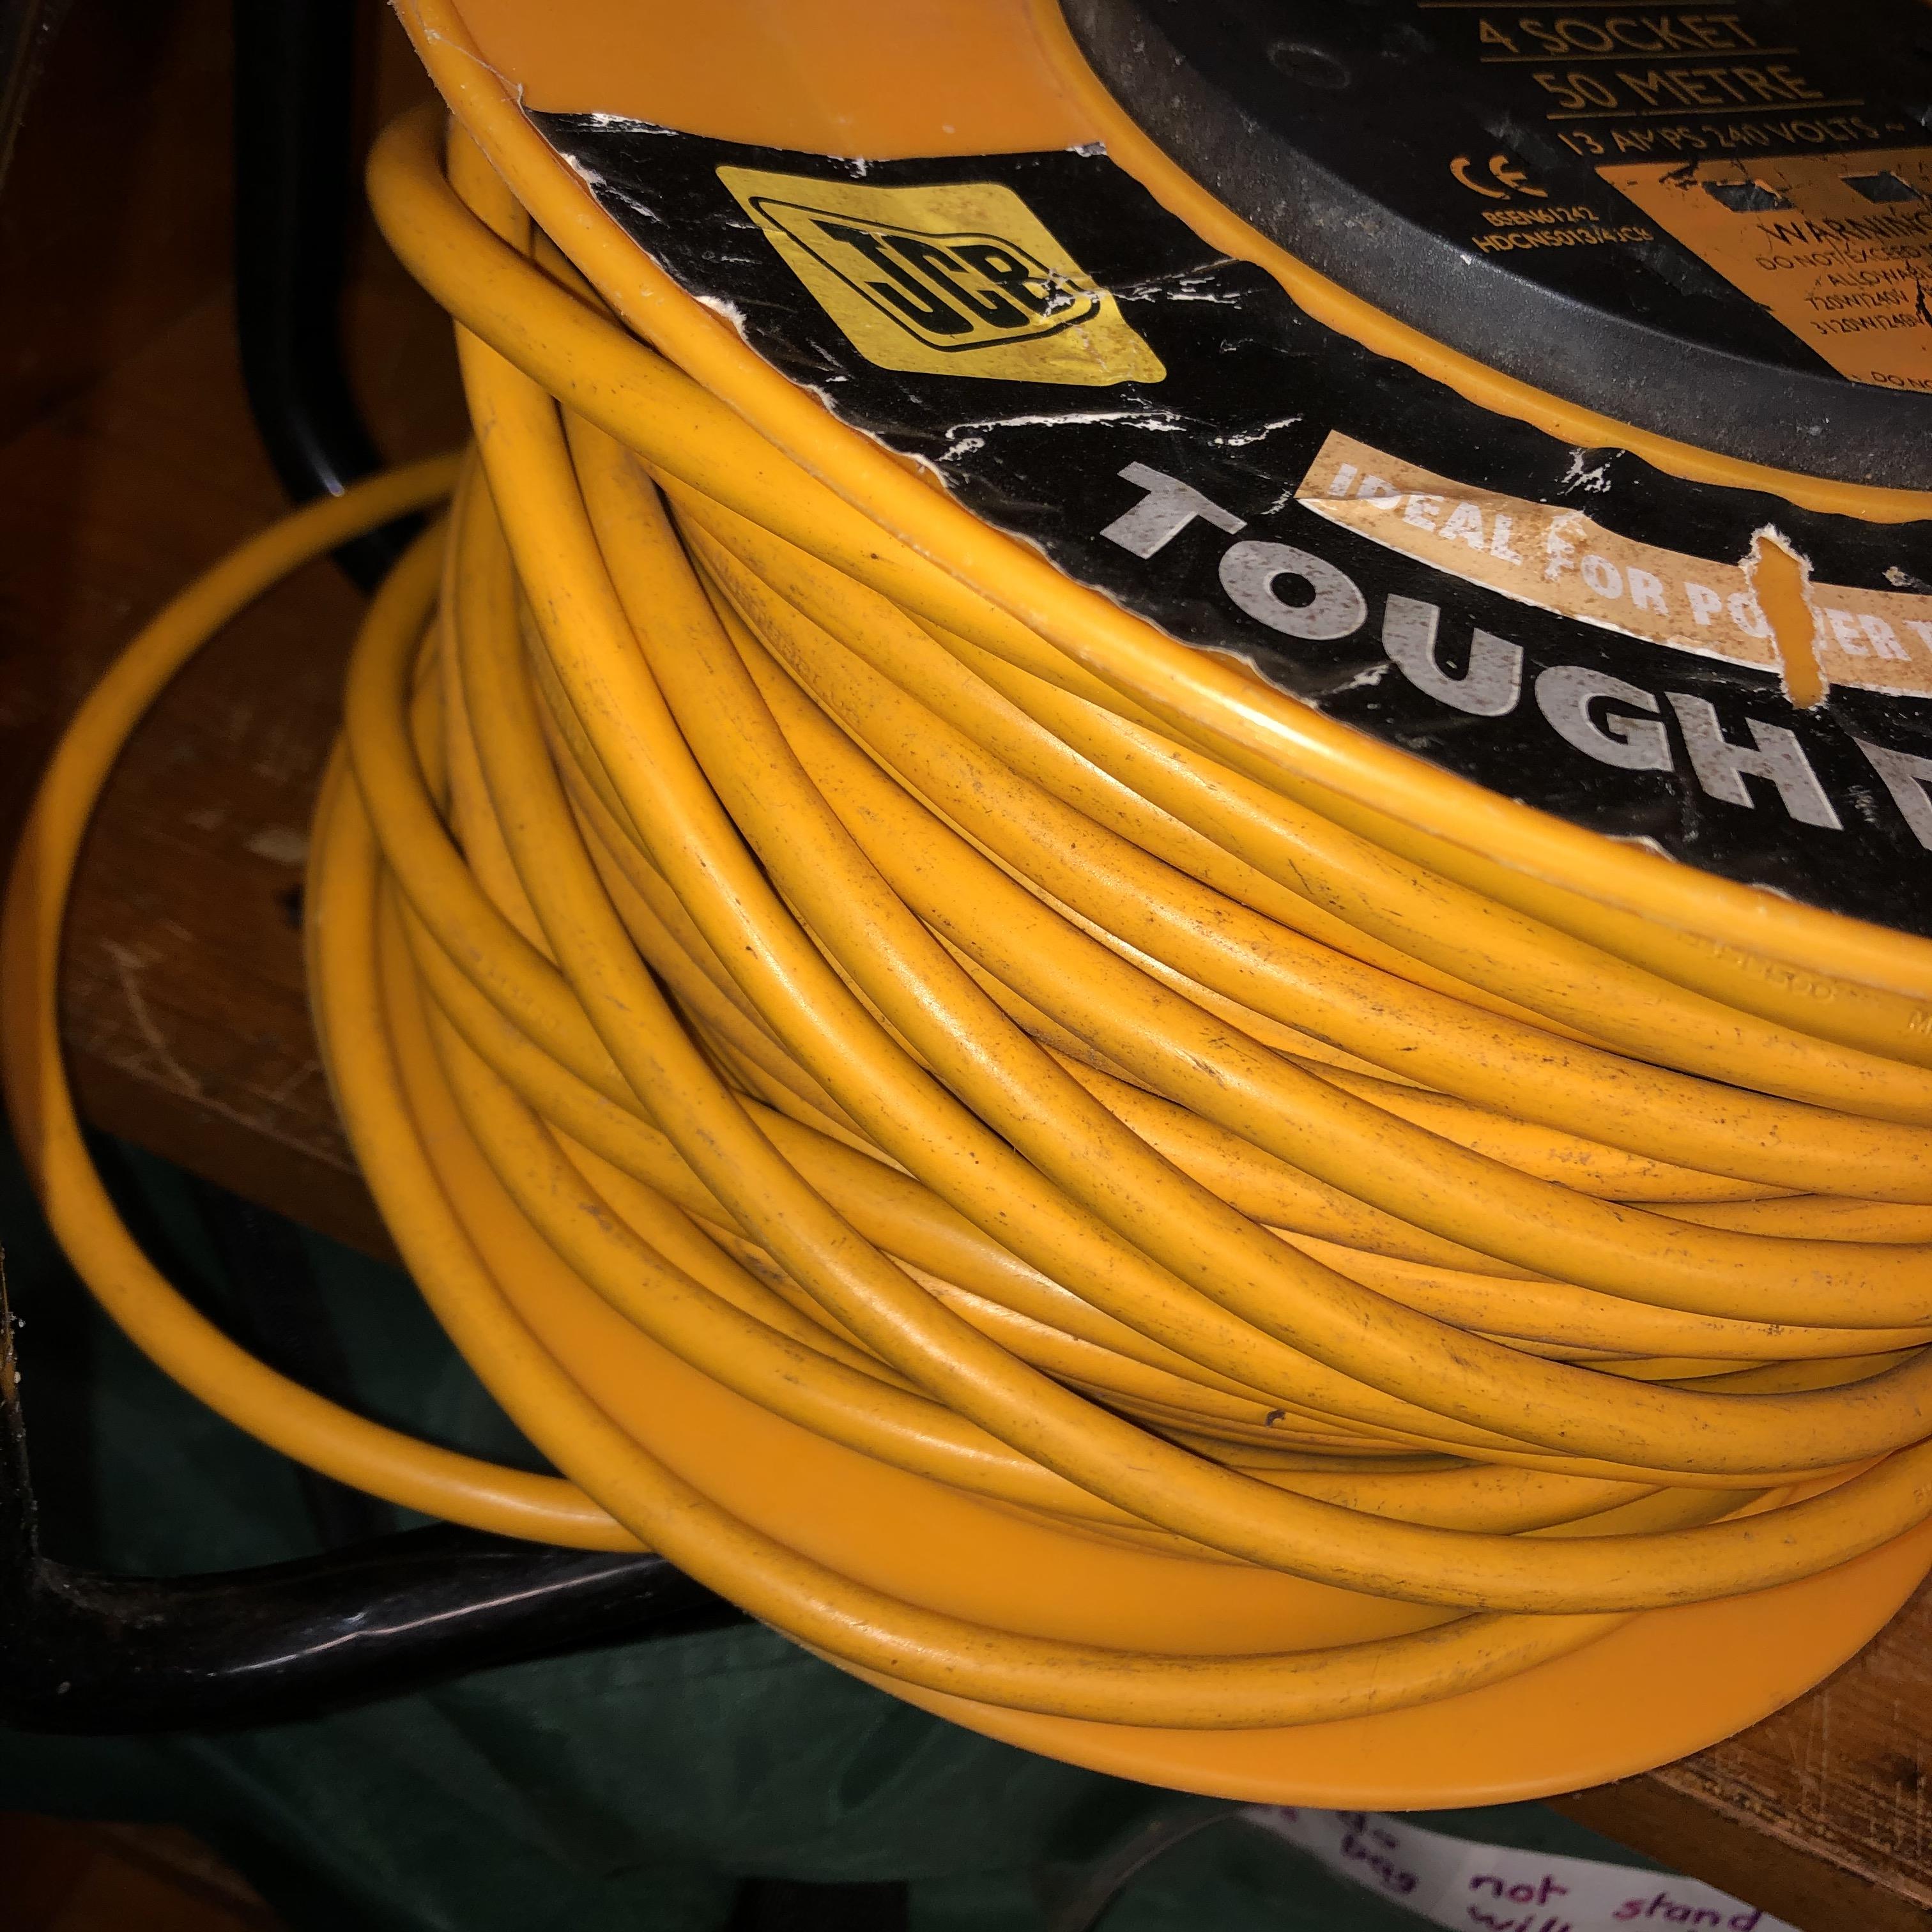 JCB FOUR SOCKET 50 METRE EXTENSION CABLE - Image 2 of 2